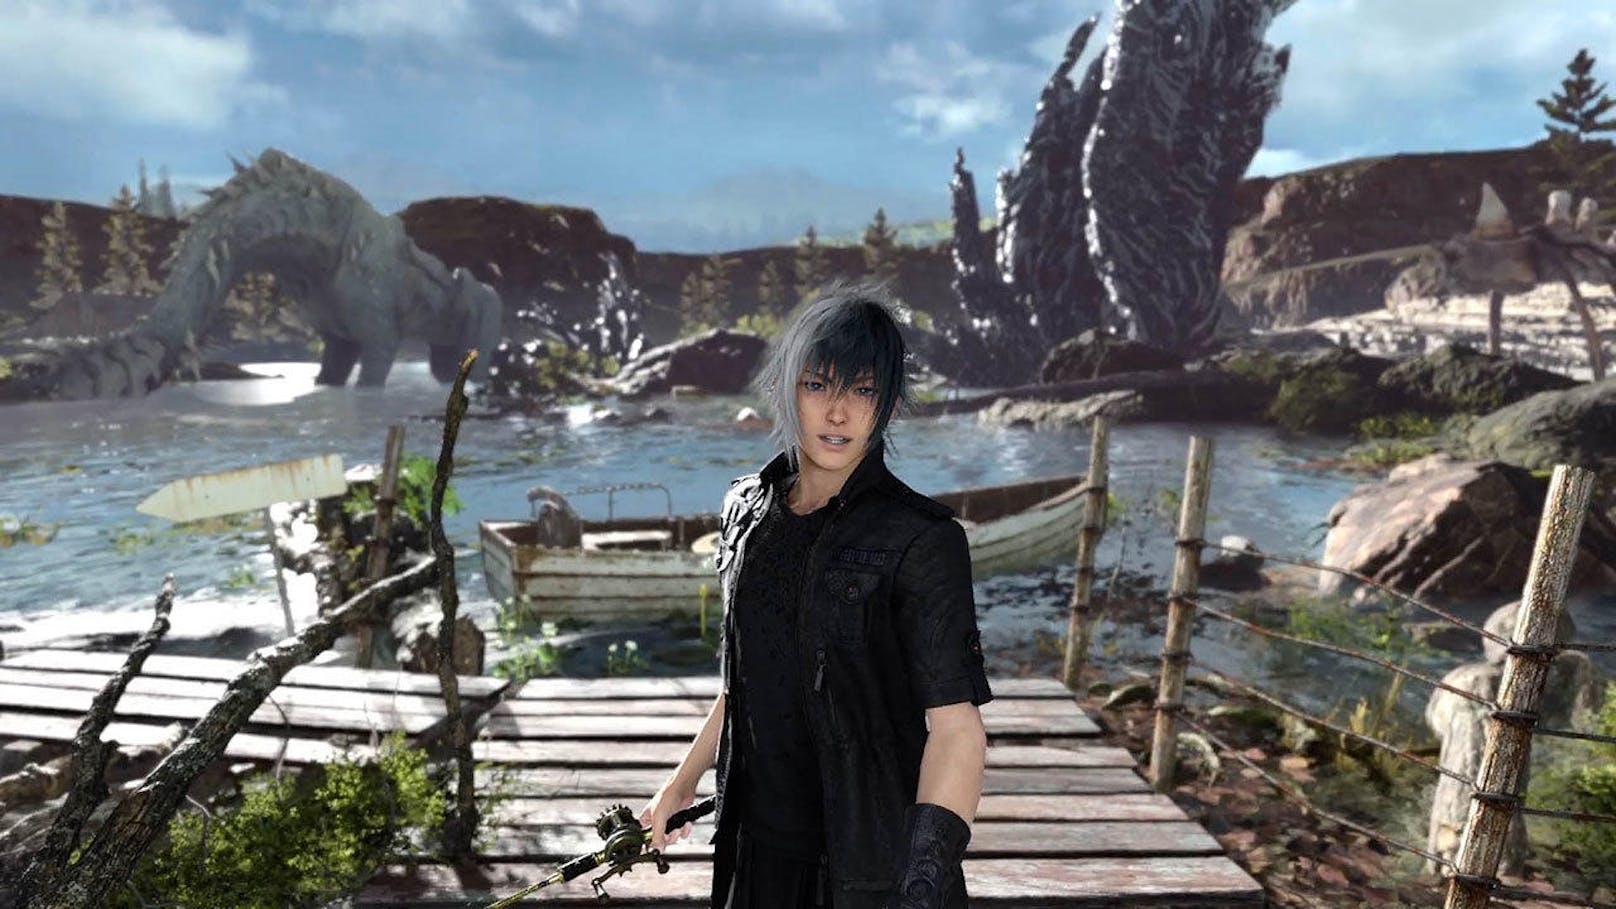  <a href="https://www.heute.at/digital/games/story/Monster-of-the-Deep--Final-Fantasy-XV-im-Test-53891956" target="_blank">Monster of the Deep: Final Fantasy XV (VR)</a>